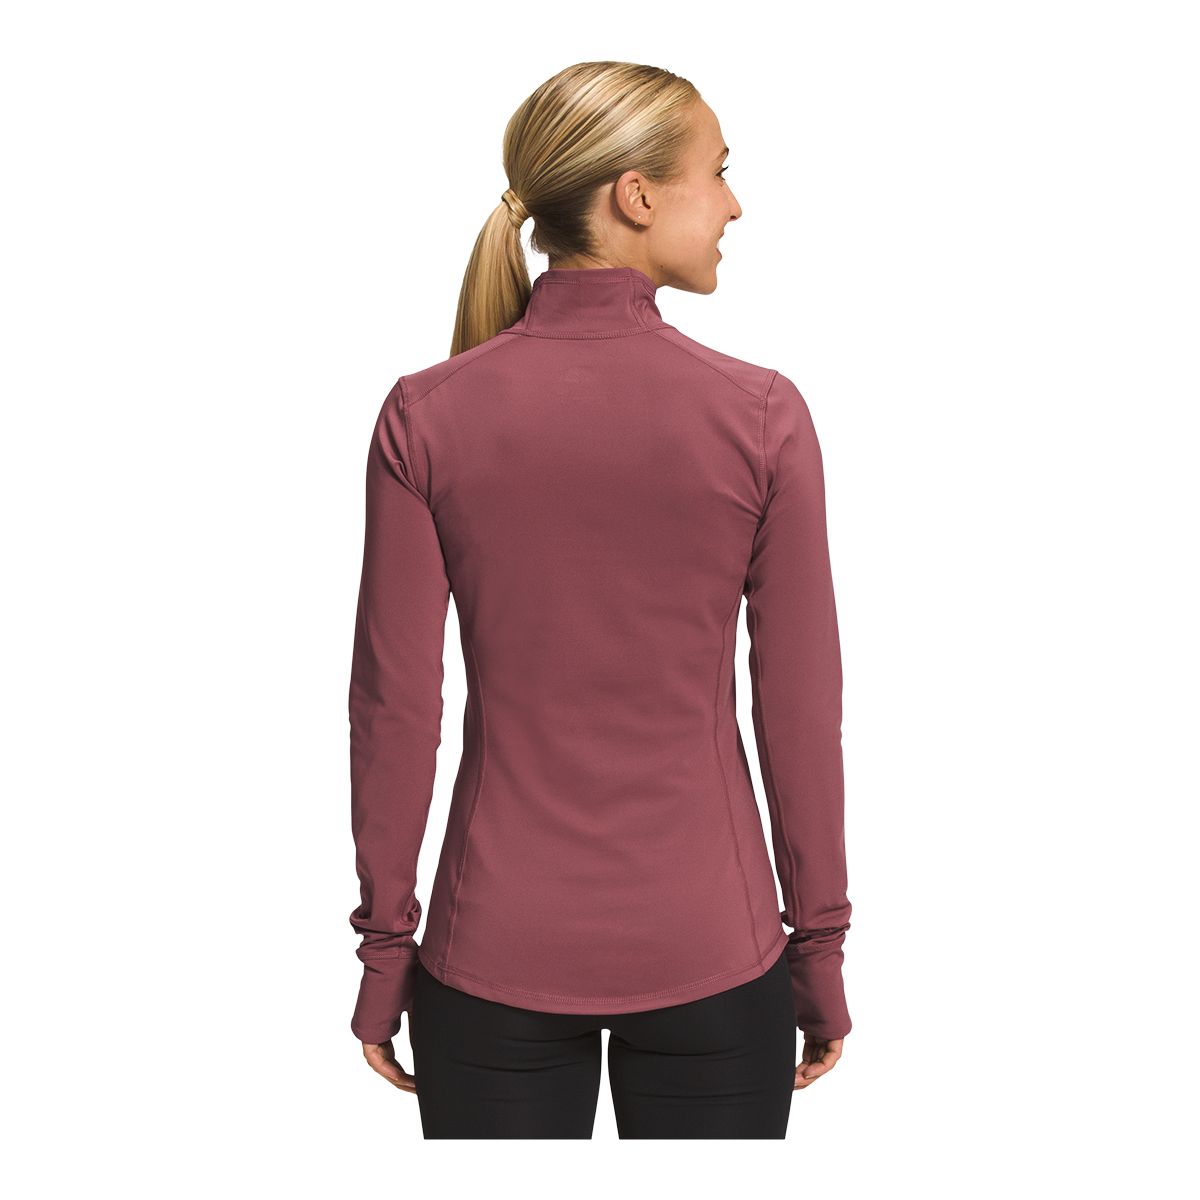 The North Face Printed Winter Warm Essential 1/4 Zip Base Layer - Women’s L Wild Ginger